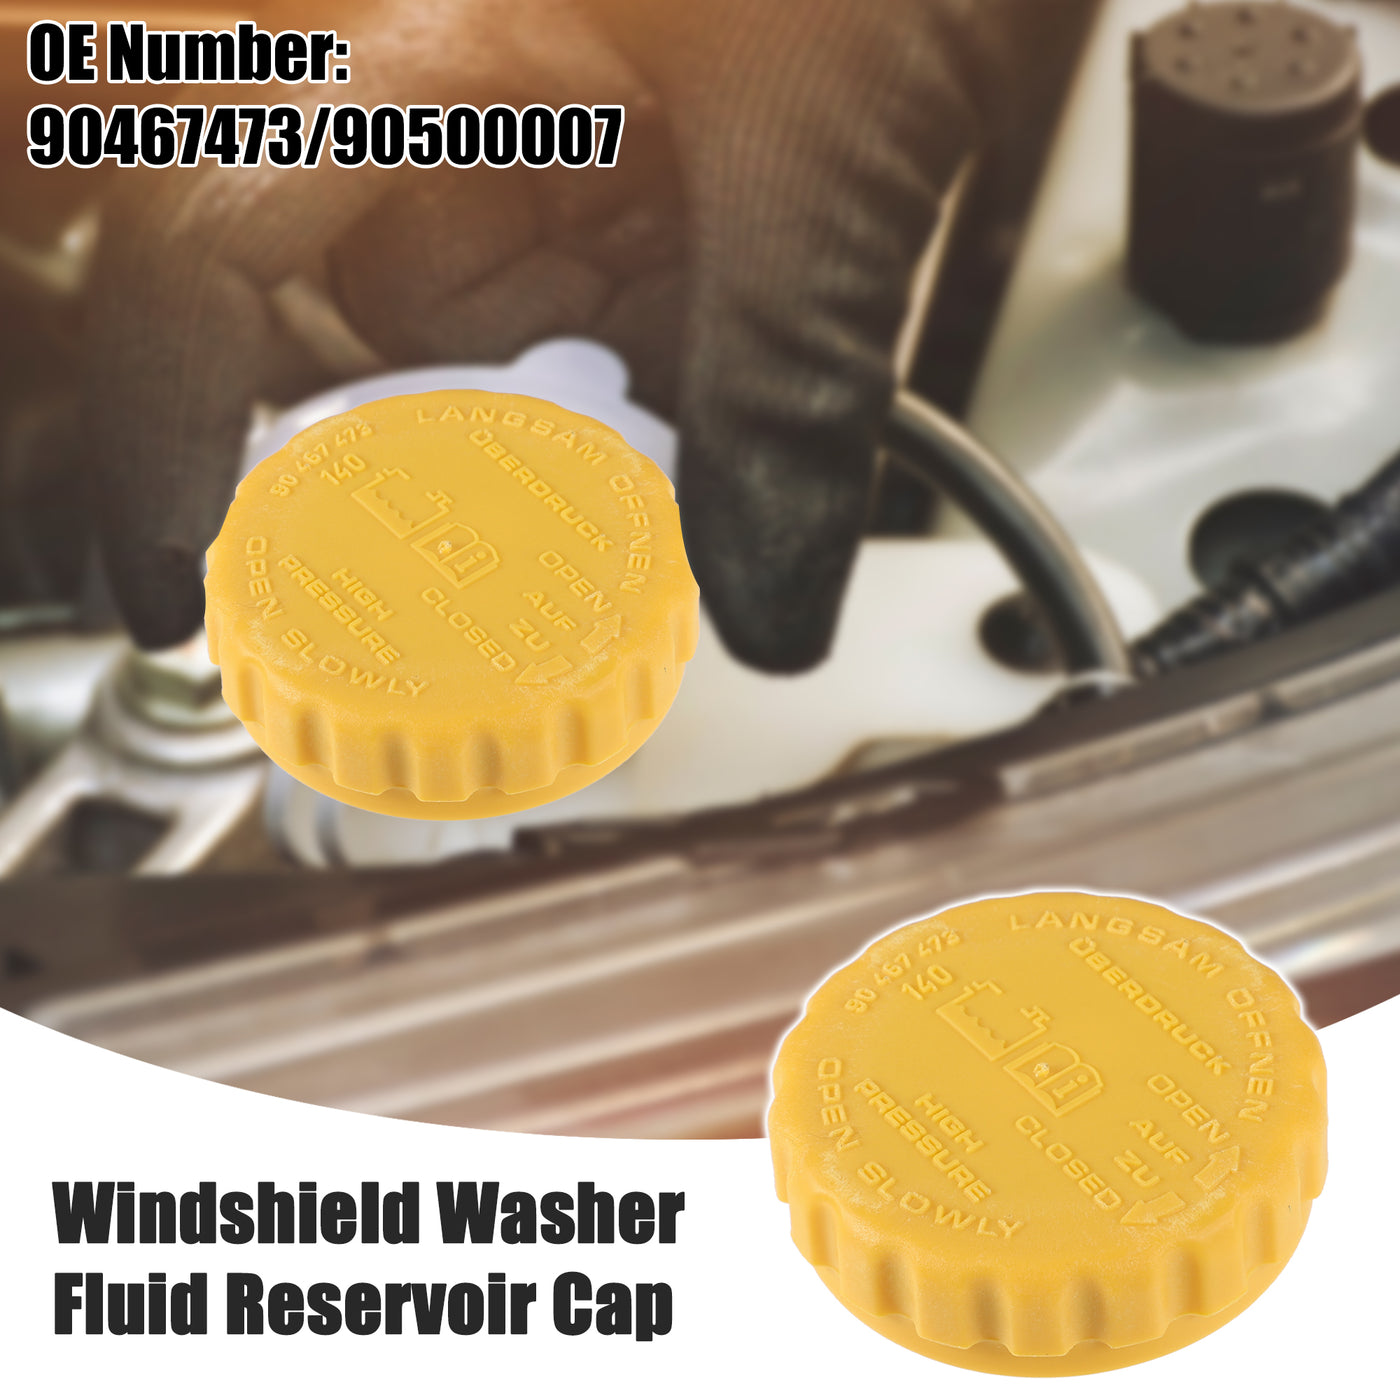 ACROPIX Windshield Washer Fluid Reservoir Bottle Cap Cover Fit for Cadillac Catera 1997-2001 No.90467473/90500007 - Pack of 1 Yellow